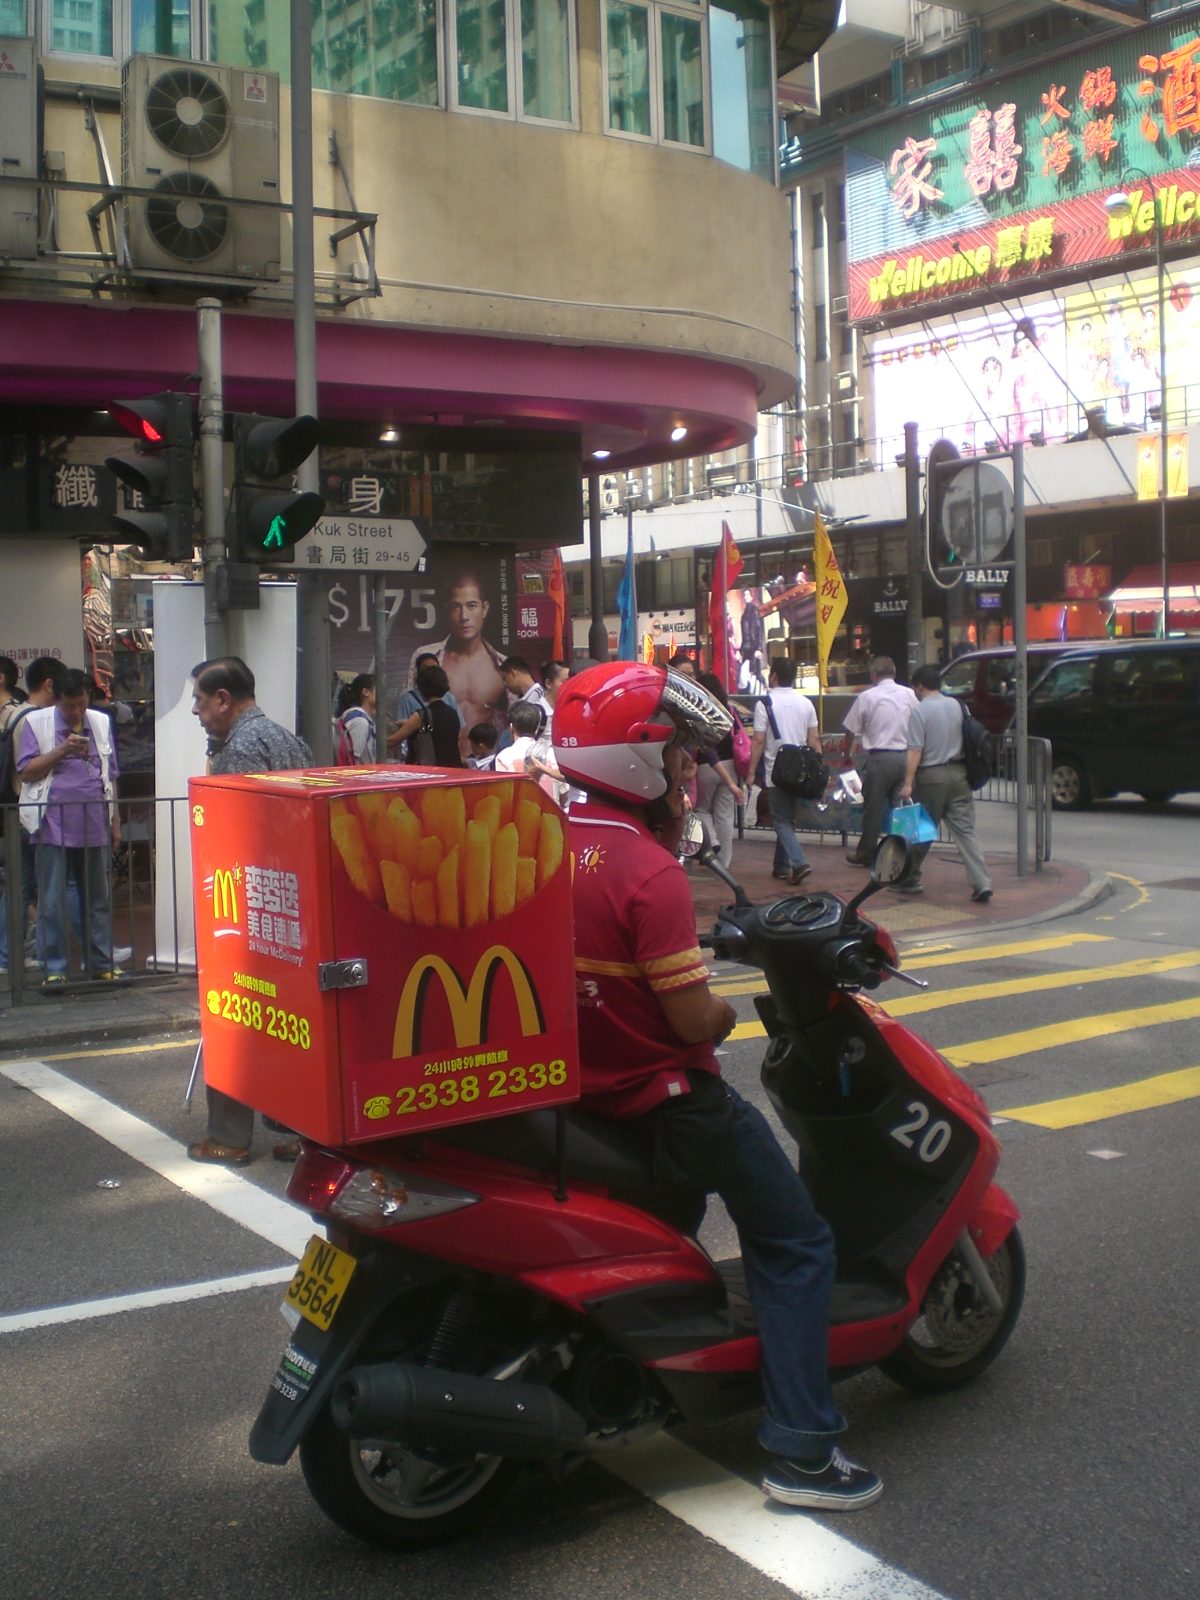 Food Delivery Services Continue to Grow in Popularity